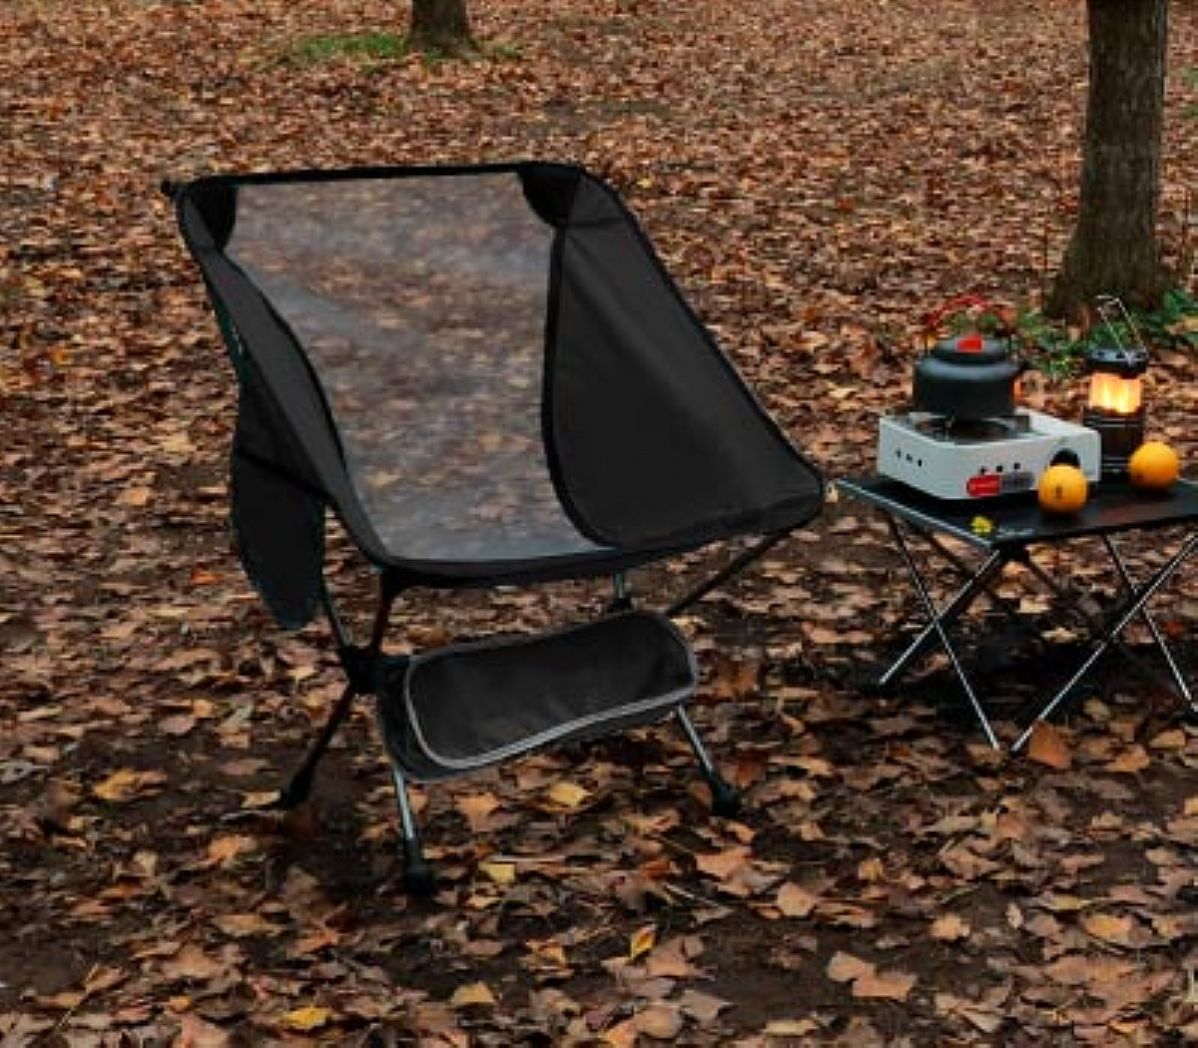 What are the benefits of investing in camping moon chairs